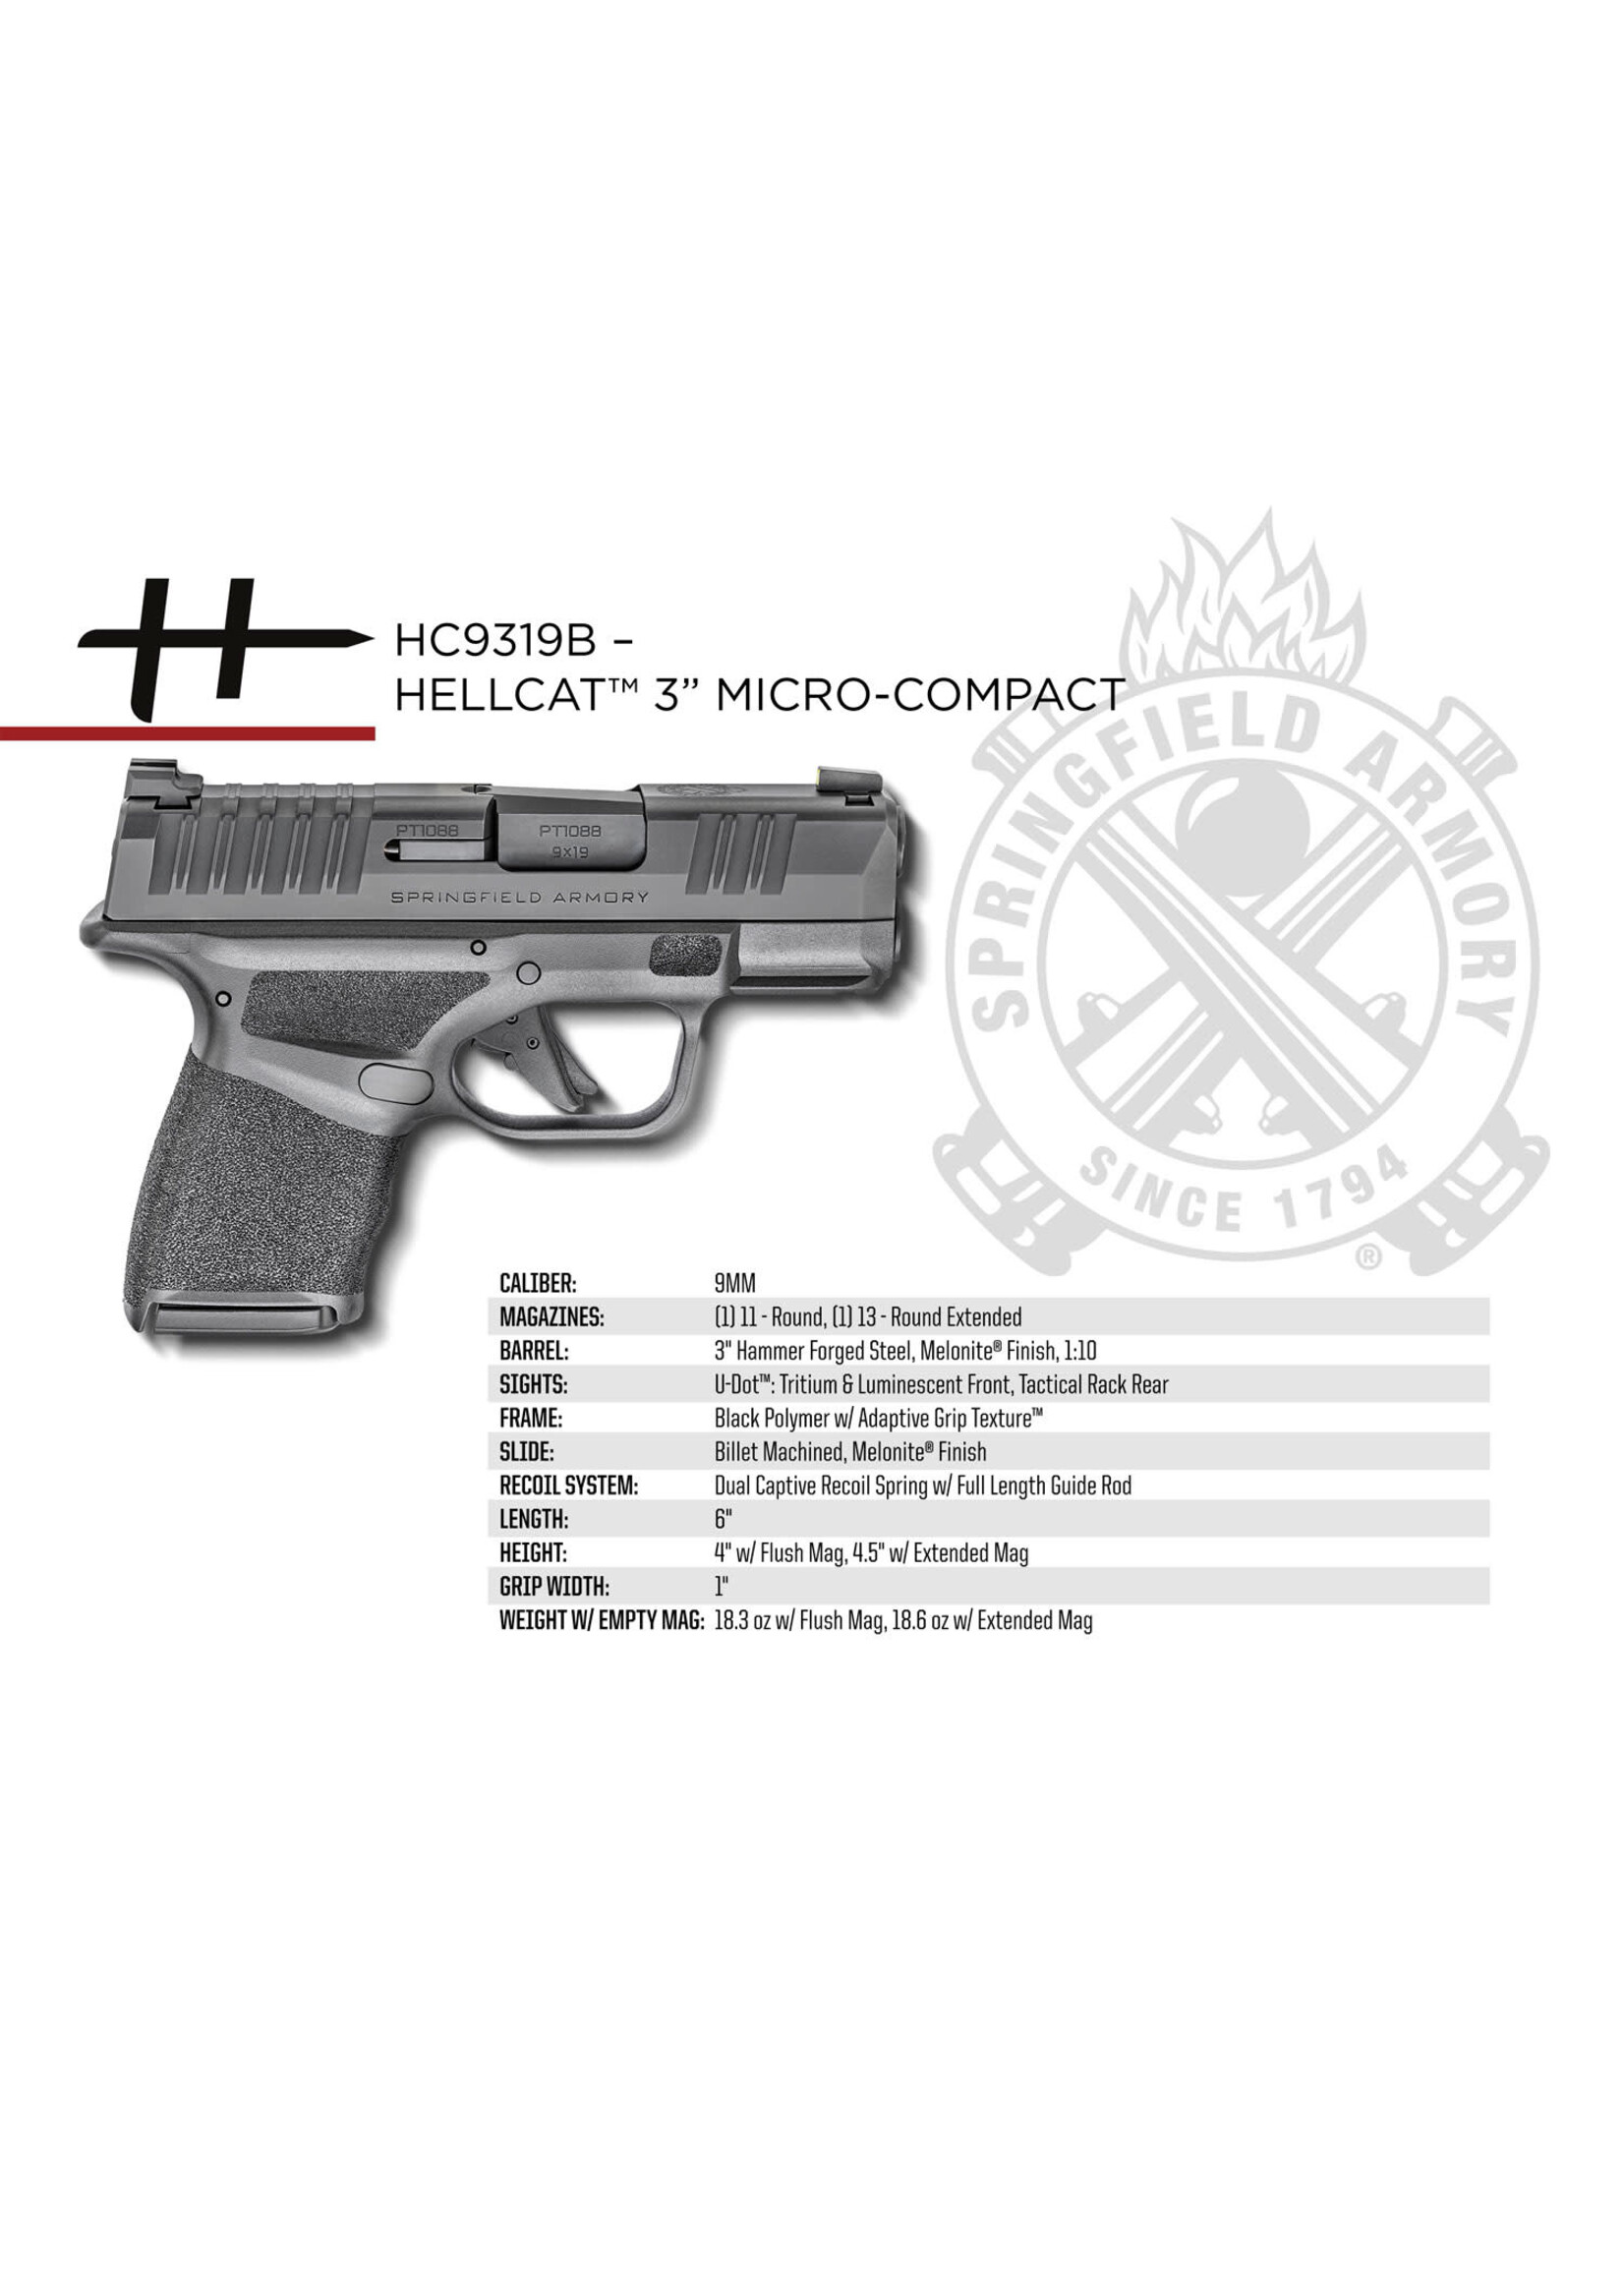 Springfield Armory Springfield Armory HC9319B Hellcat Micro-Compact 9mm Luger 11+1/13+1, 3" Black Melonite Hammer Forged Barrel, Black Melonite Serrated Slide, Black Polymer Frame w/Picatinny Rail, Adaptive Textured Polymer Grip, Right Hand